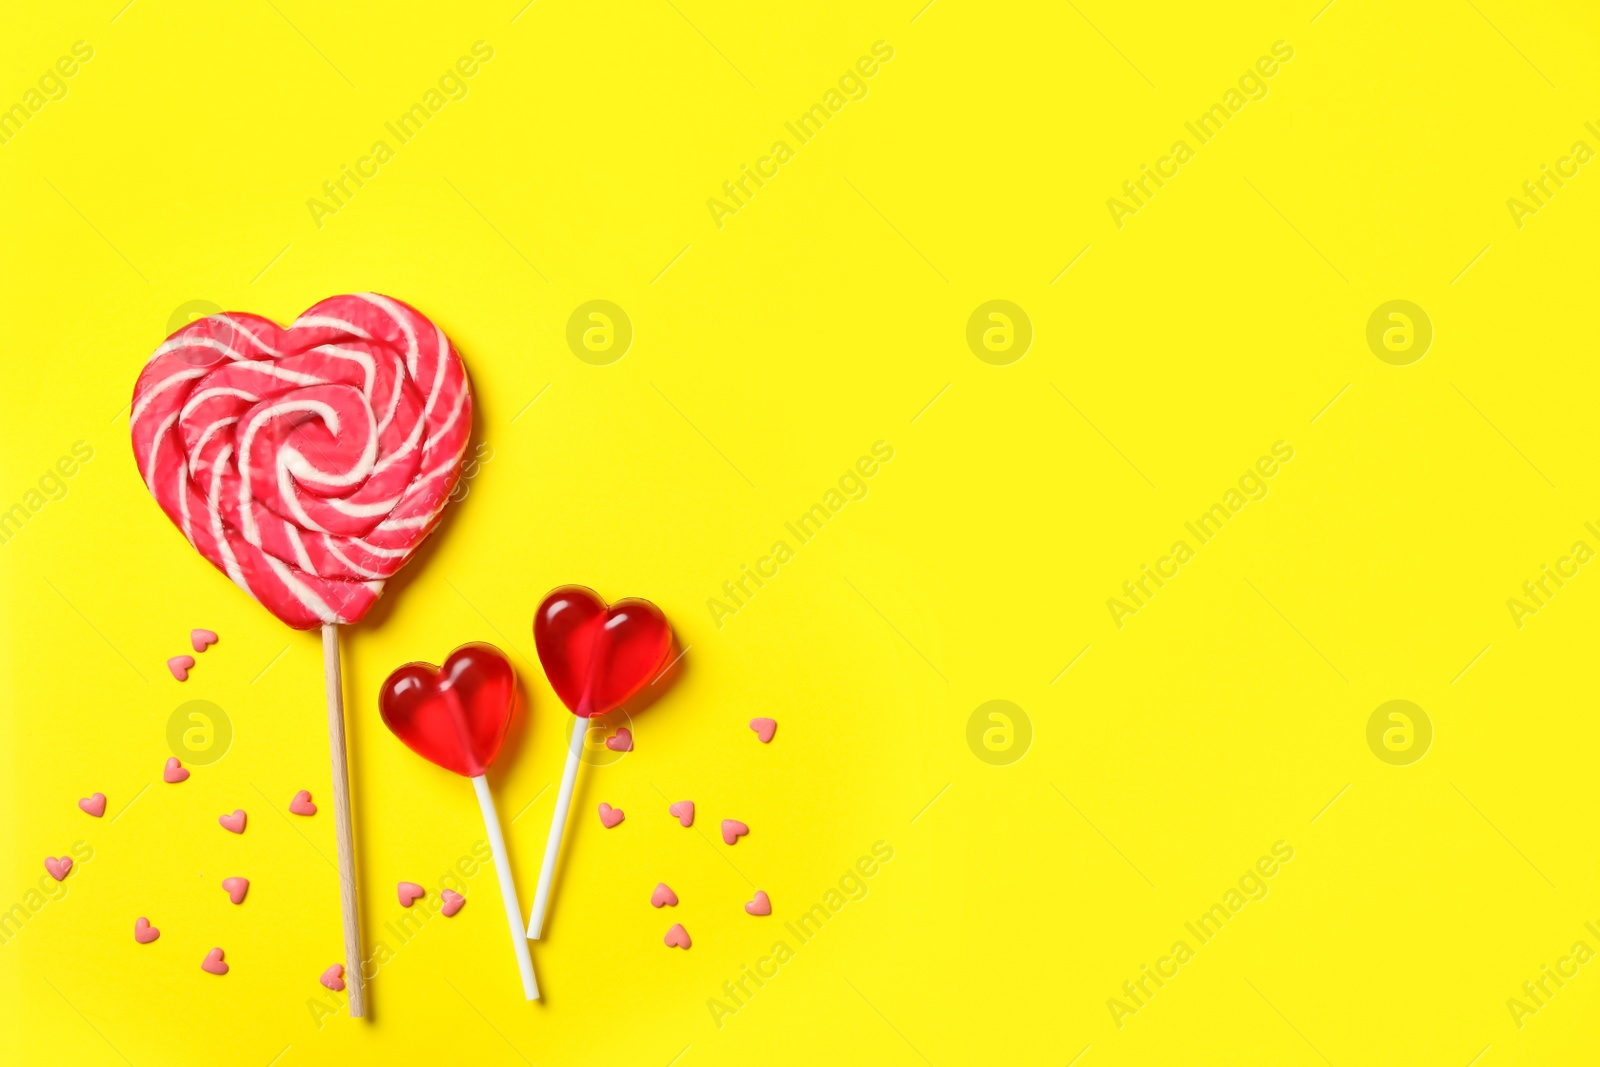 Photo of Sweet heart shaped lollipops and sprinkles on yellow background, flat lay with space for text. Valentine's day celebration